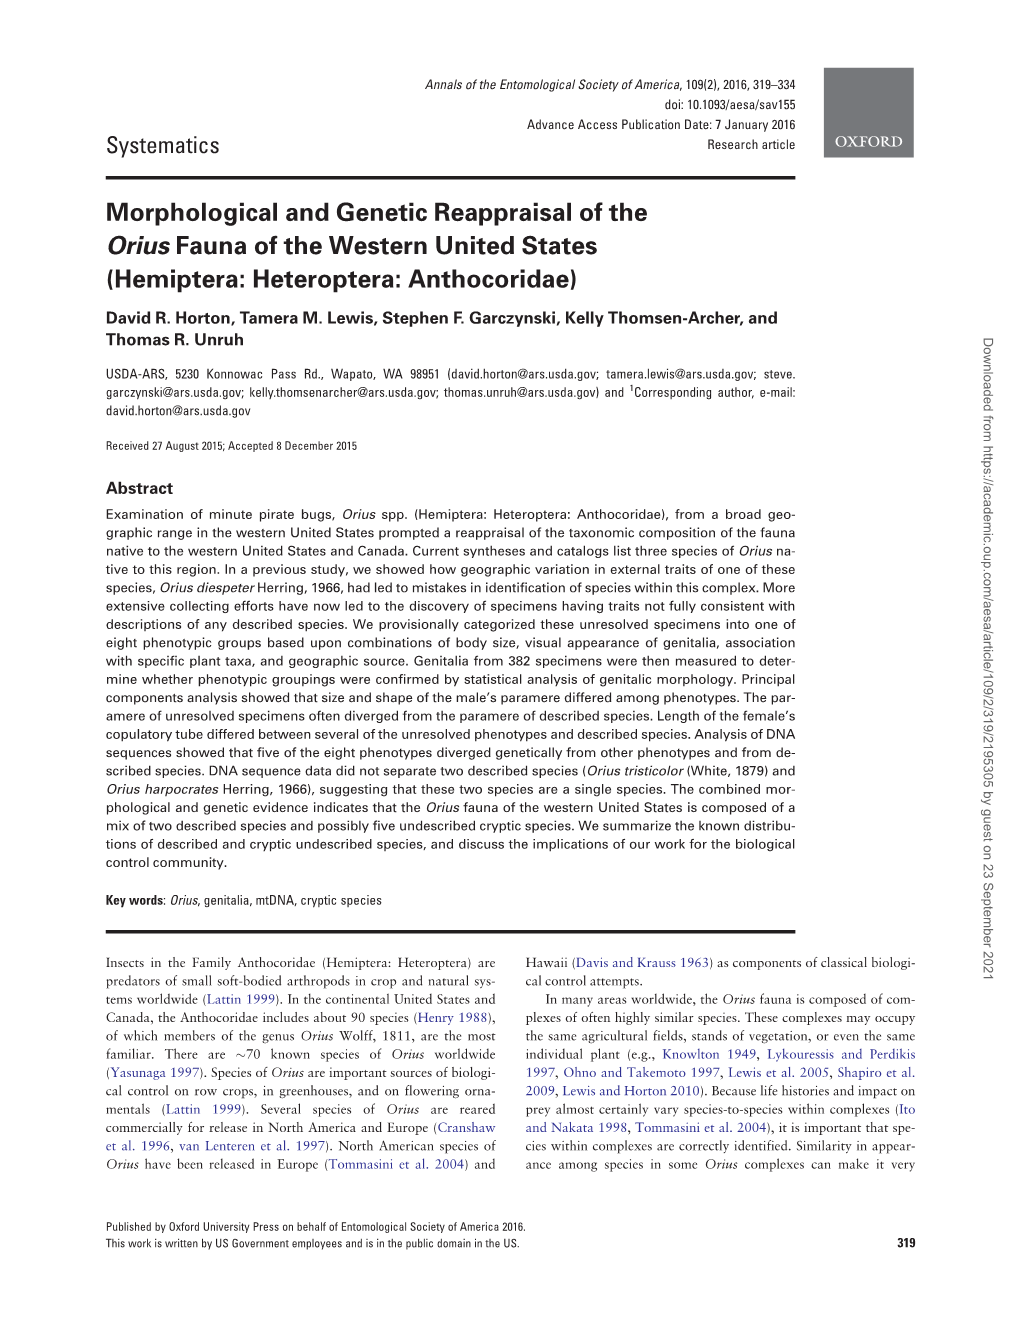 Morphological and Genetic Reappraisal of the Orius Fauna of the Western United States (Hemiptera: Heteroptera: Anthocoridae)